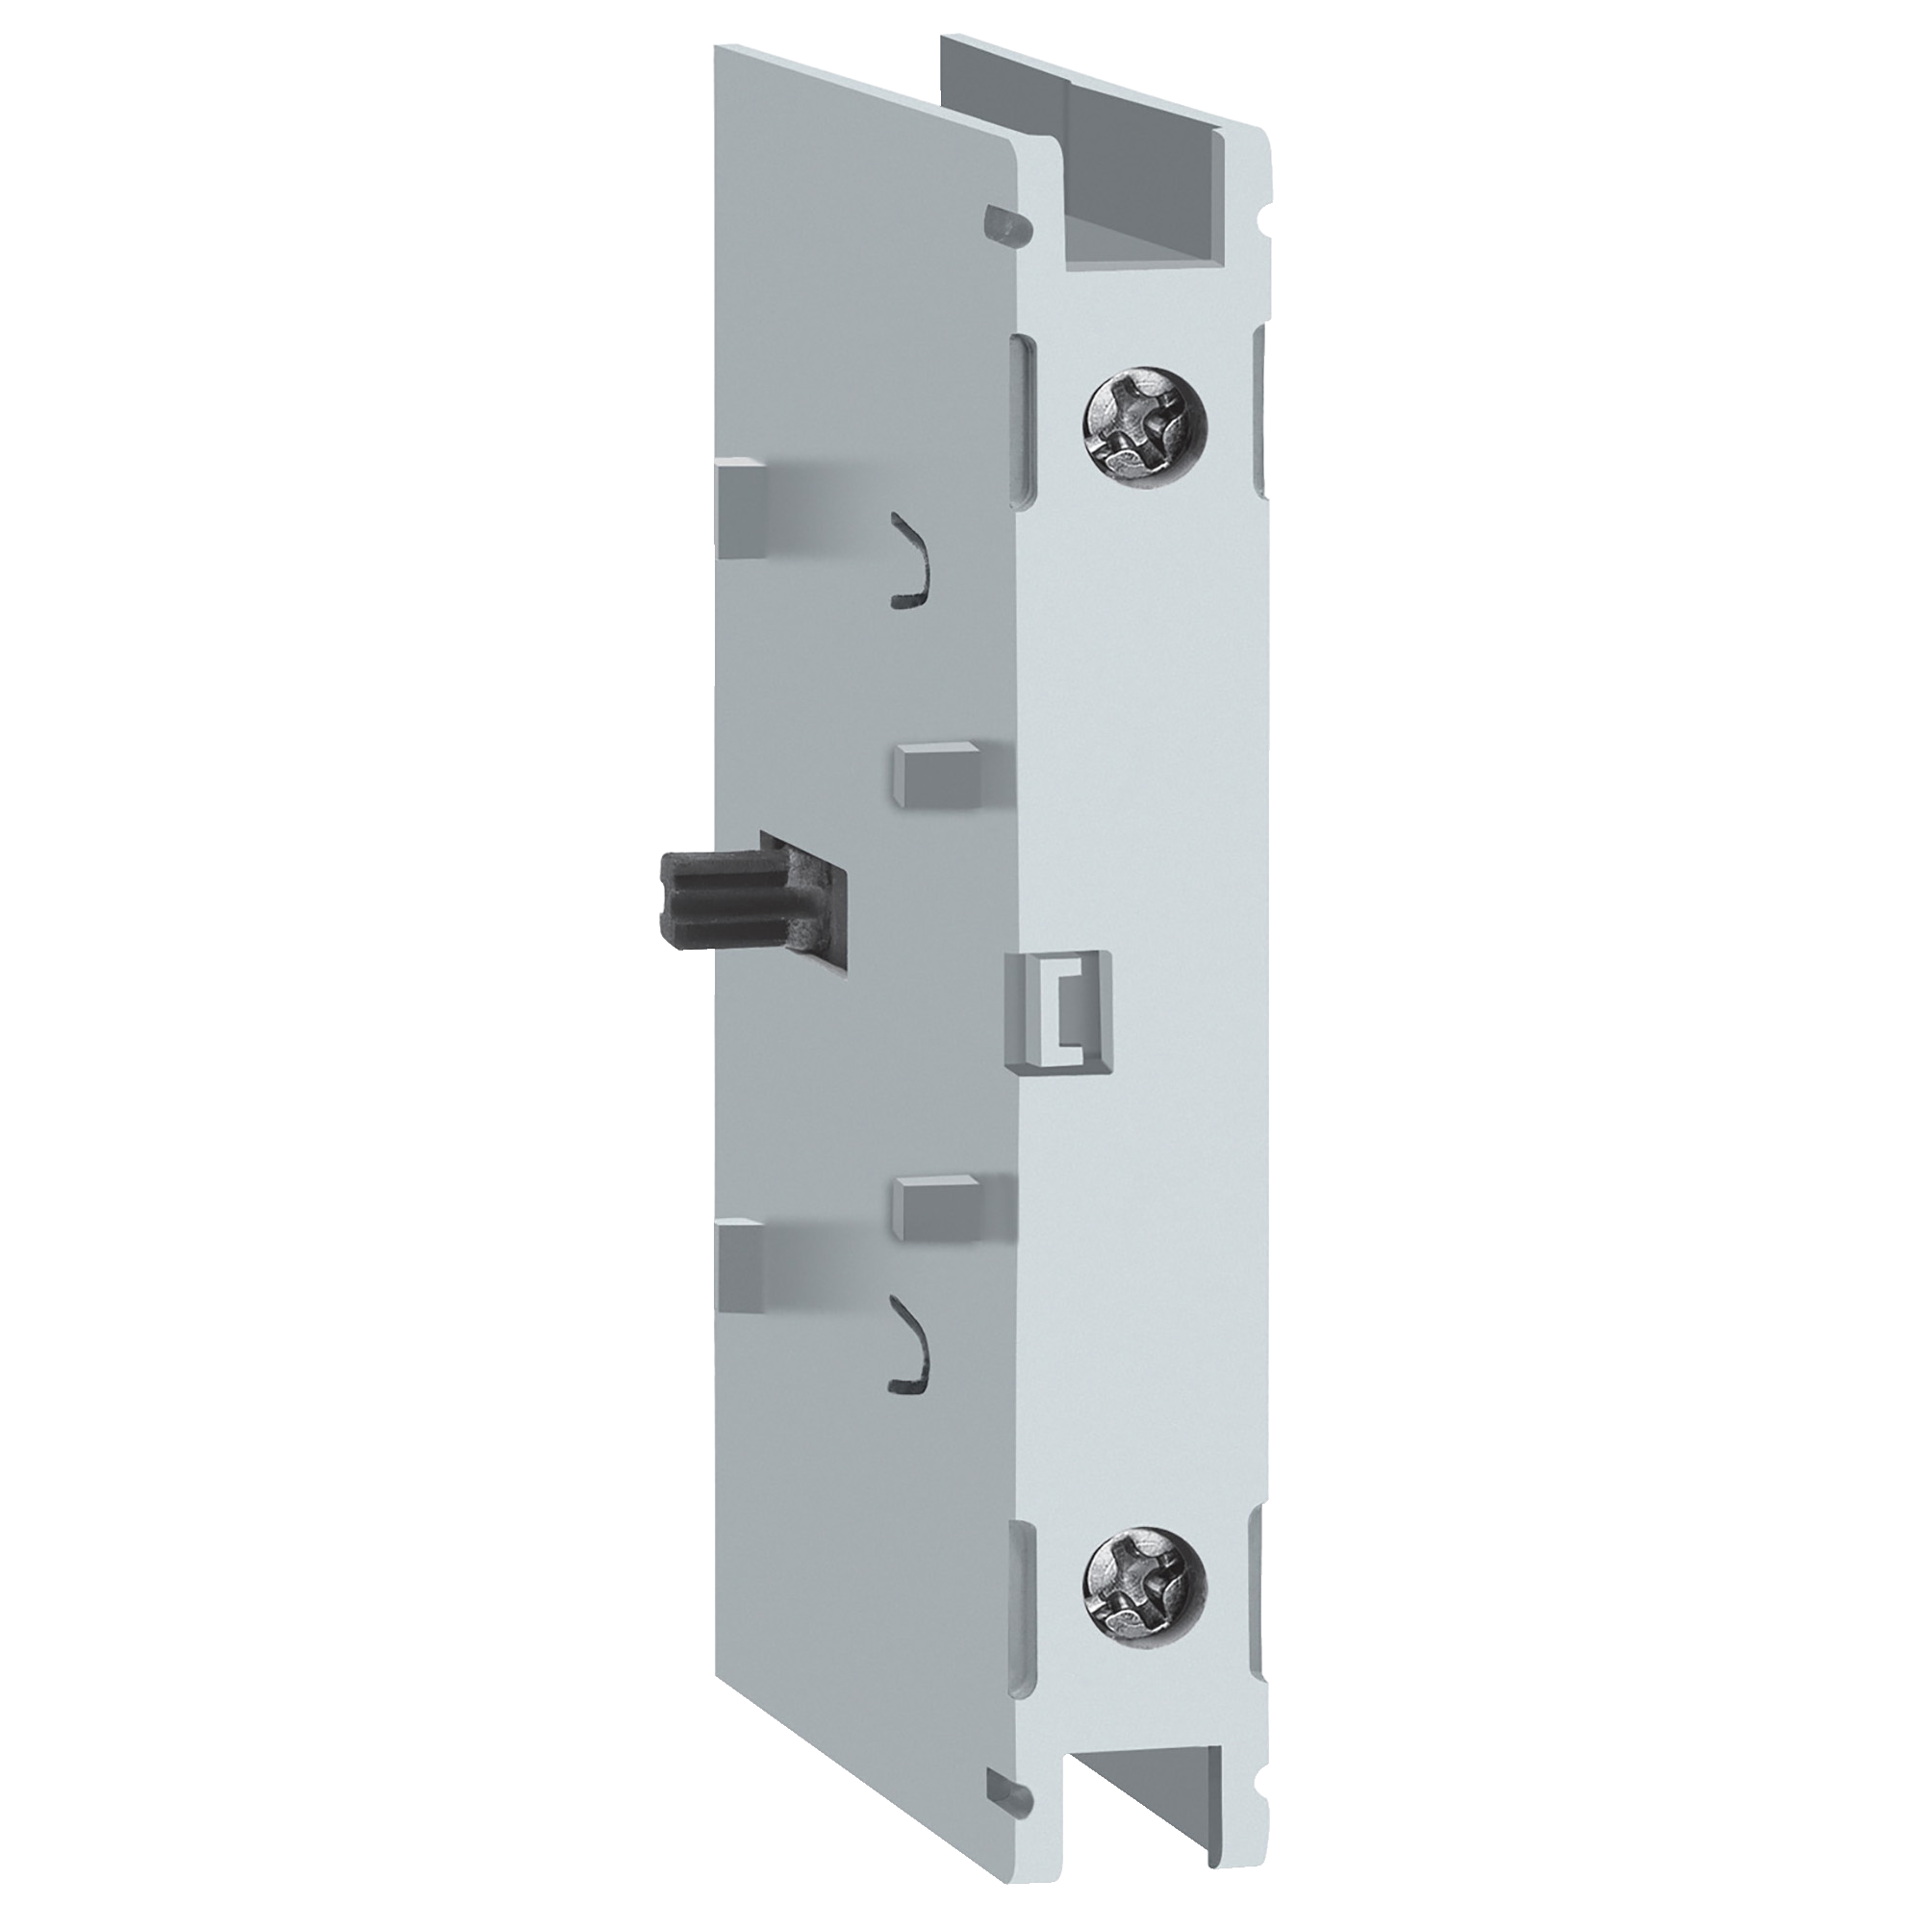 Disconnect switch, TeSys VLS, additional pole, early-make closing, 63A, for 63A switch, size 1, DIN rail